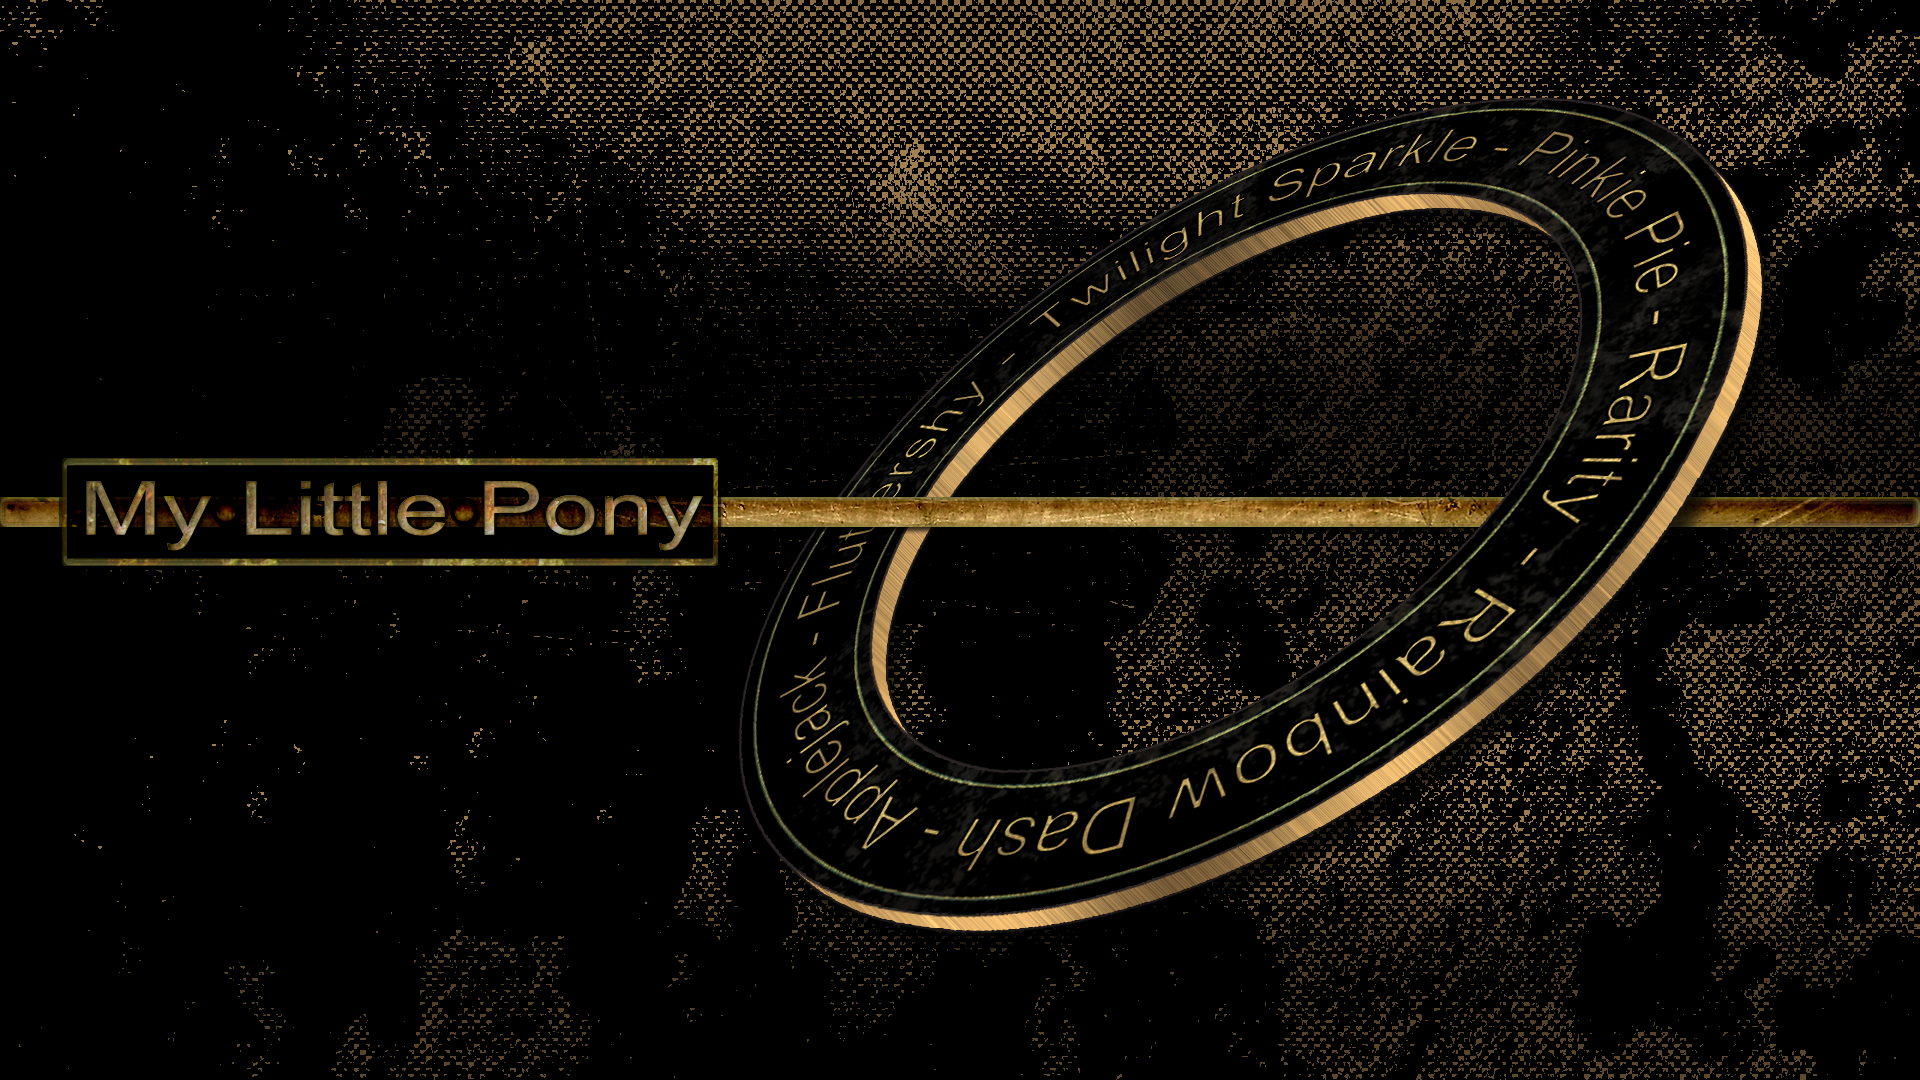 My Little Pony- Mane6 - Rust Ring by pims1978